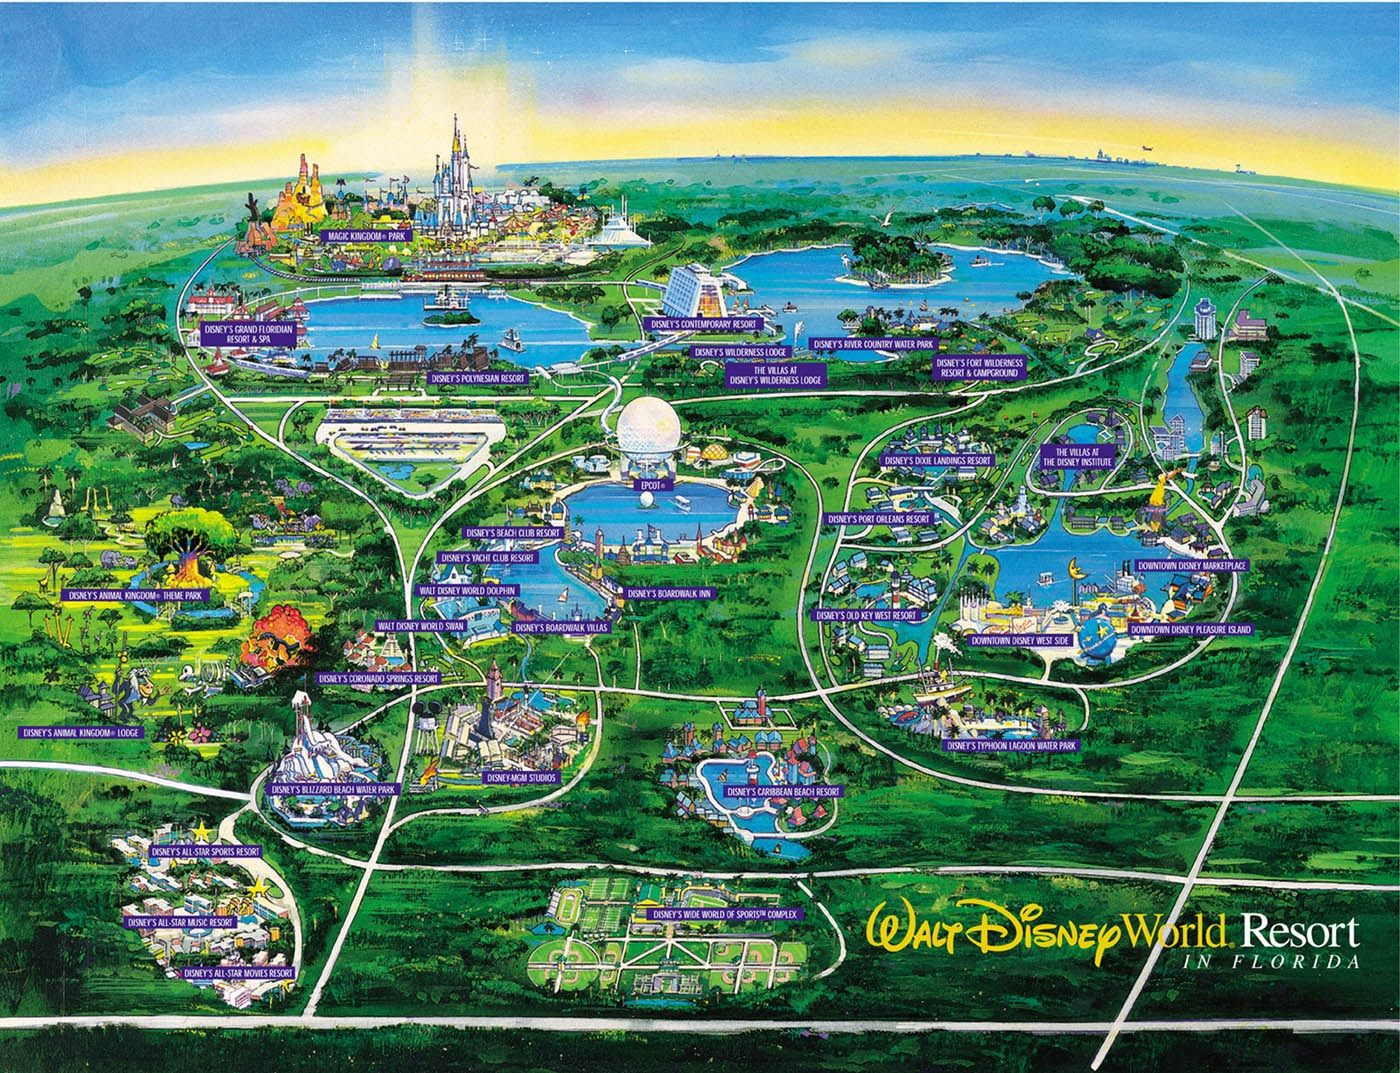 Images Of Disneyworld Map | Disney World Map See Map Details From - Disney World Florida Map